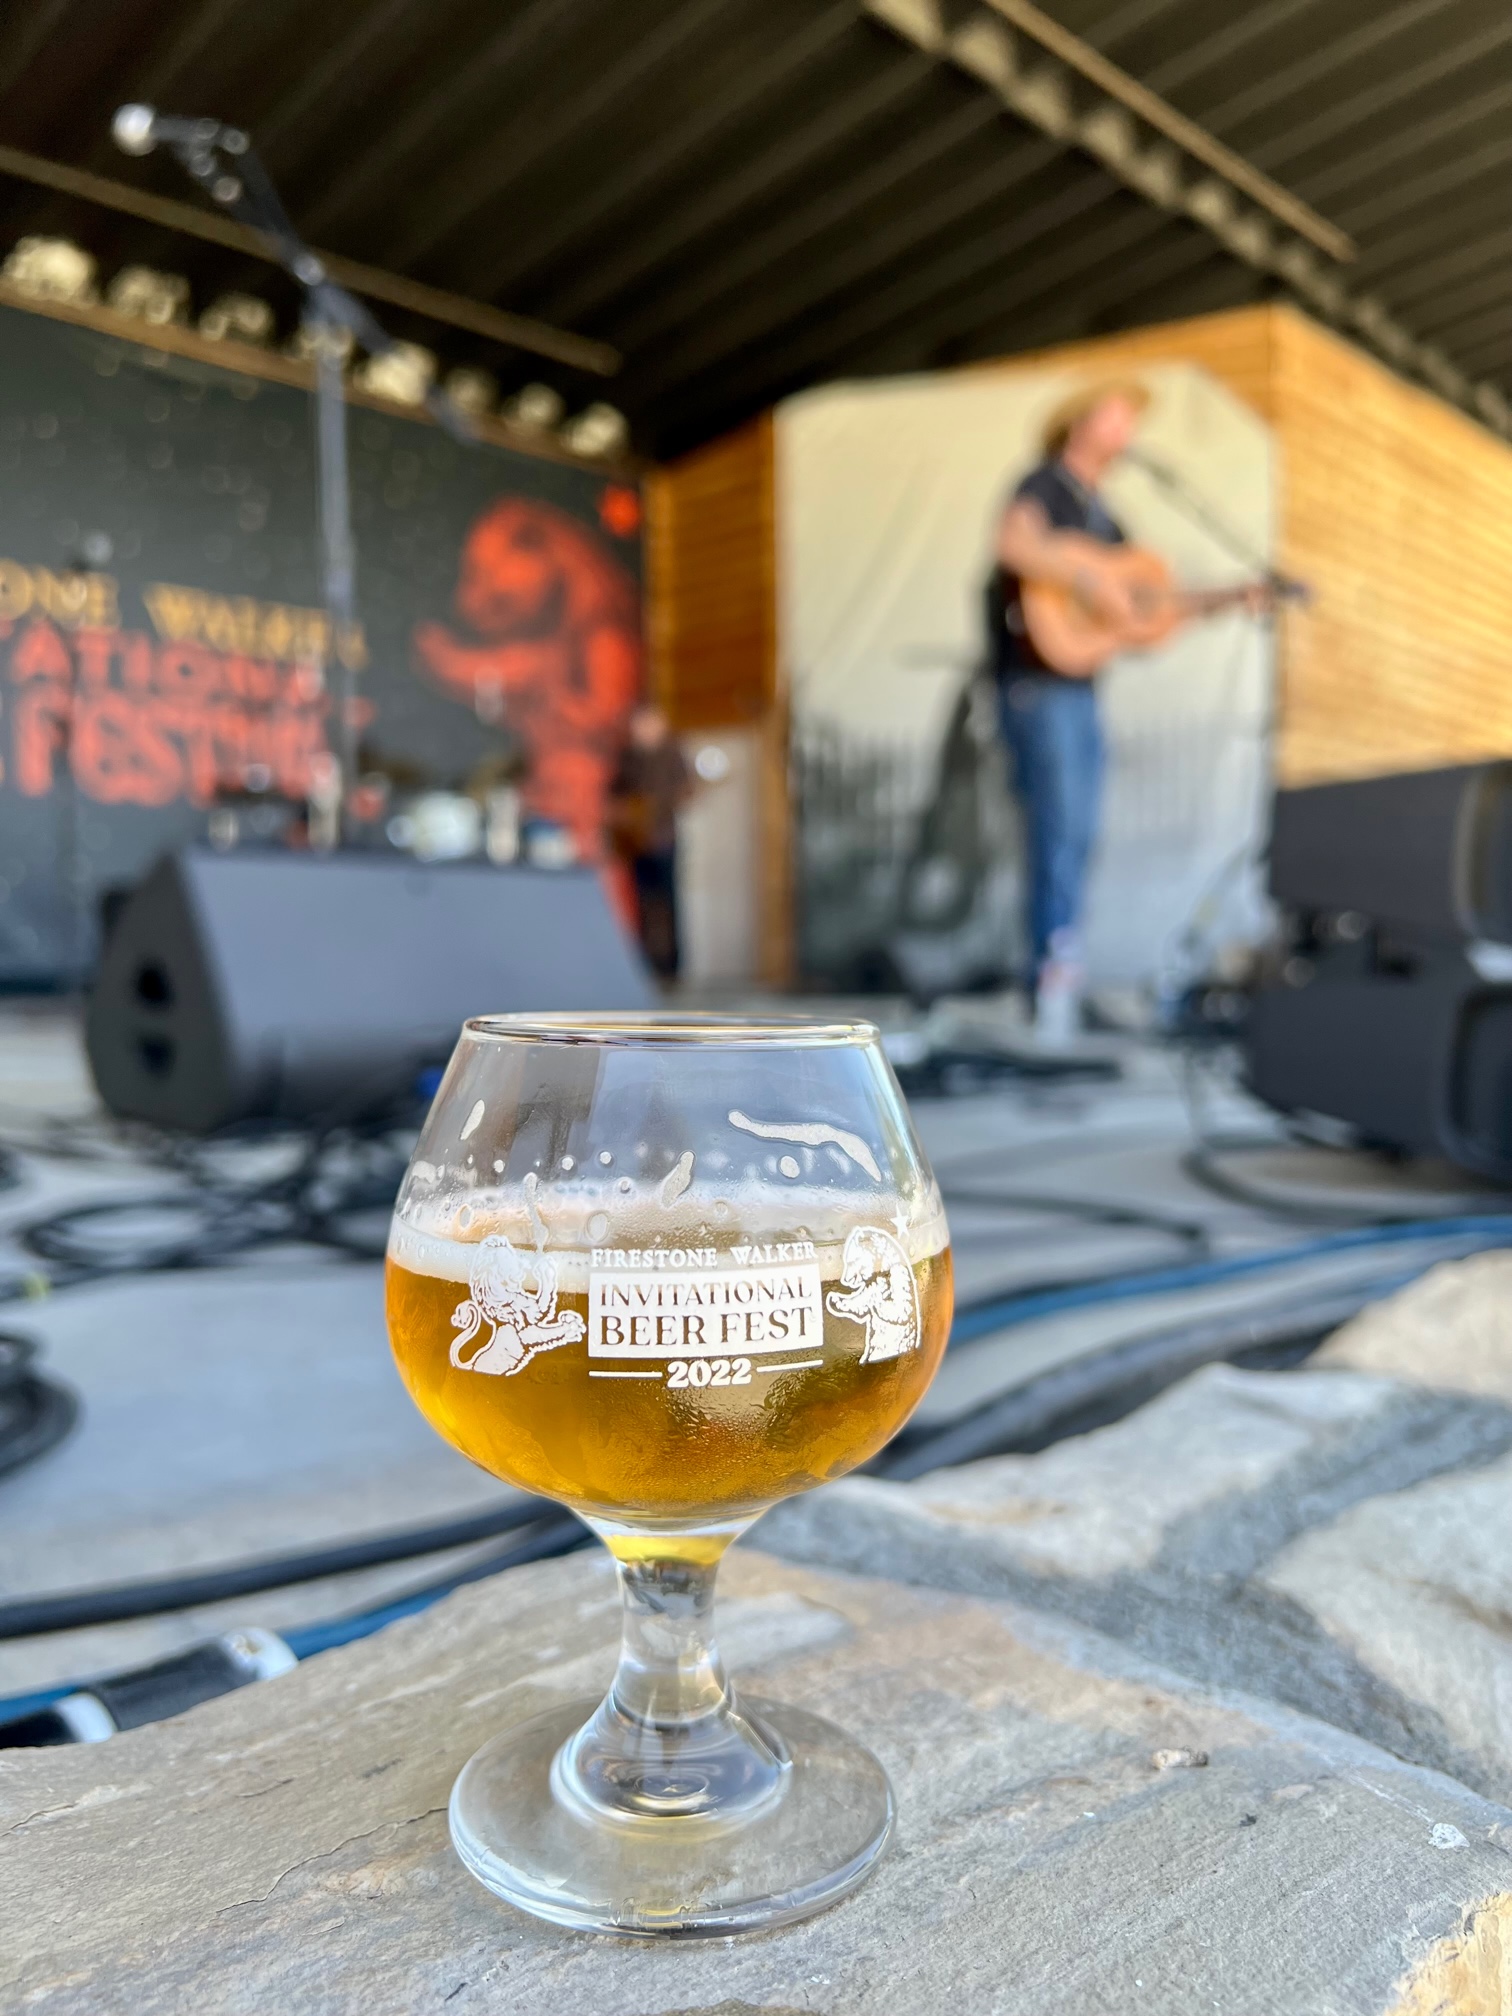 Beers and live music at the 2022 Firestone Walker Invitational Beer Fest made for a great combo in the warm Central Coast sun.